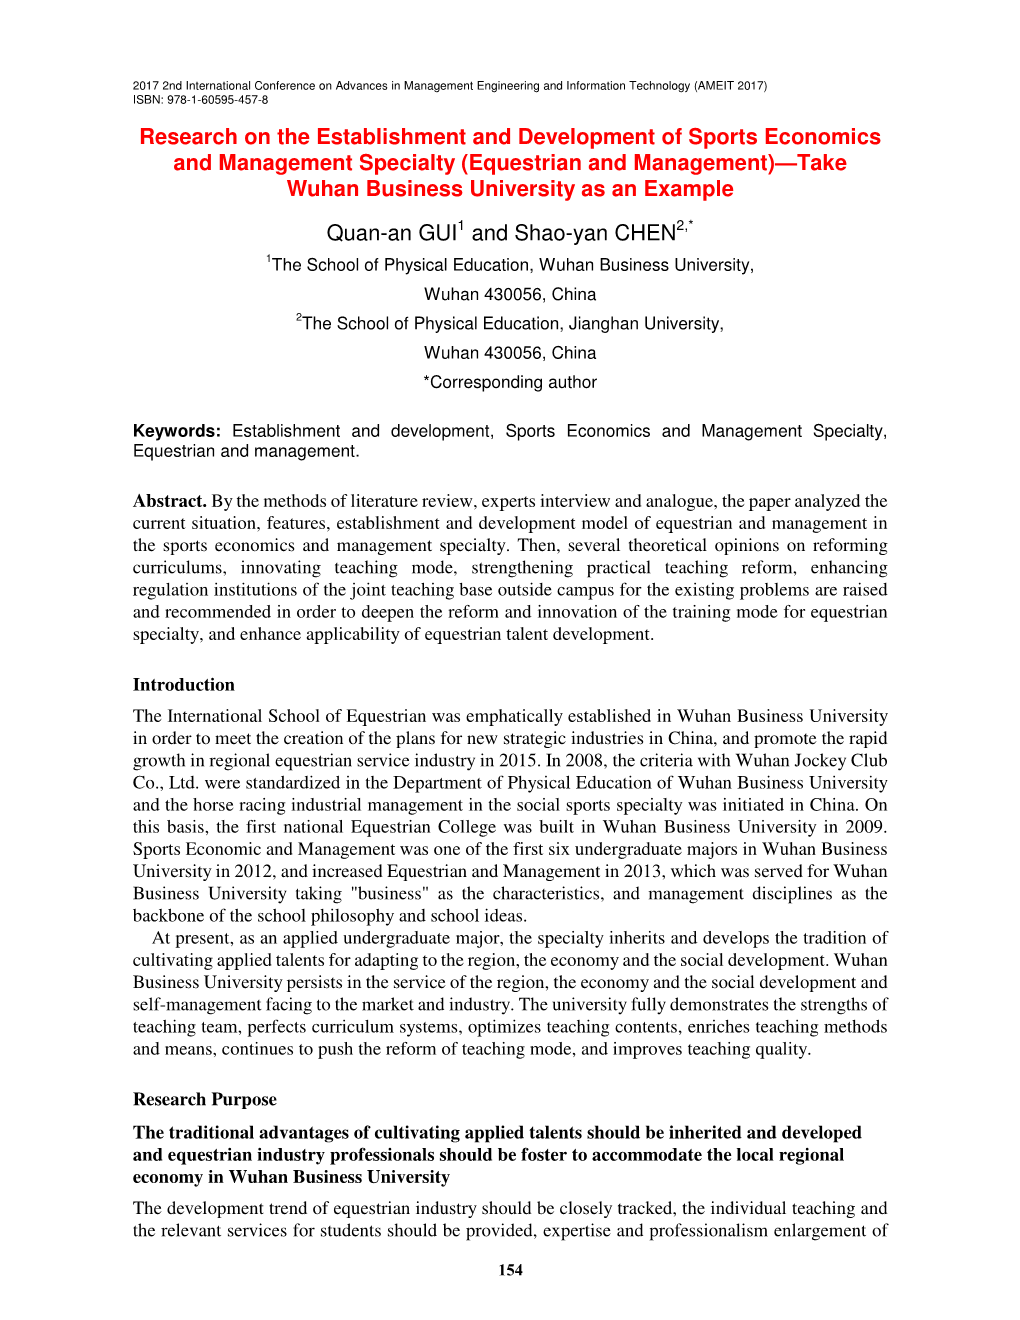 Research on the Establishment and Development of Sports Economics and Management Specialty (Equestrian and Management)—Take Wuhan Business University As an Example